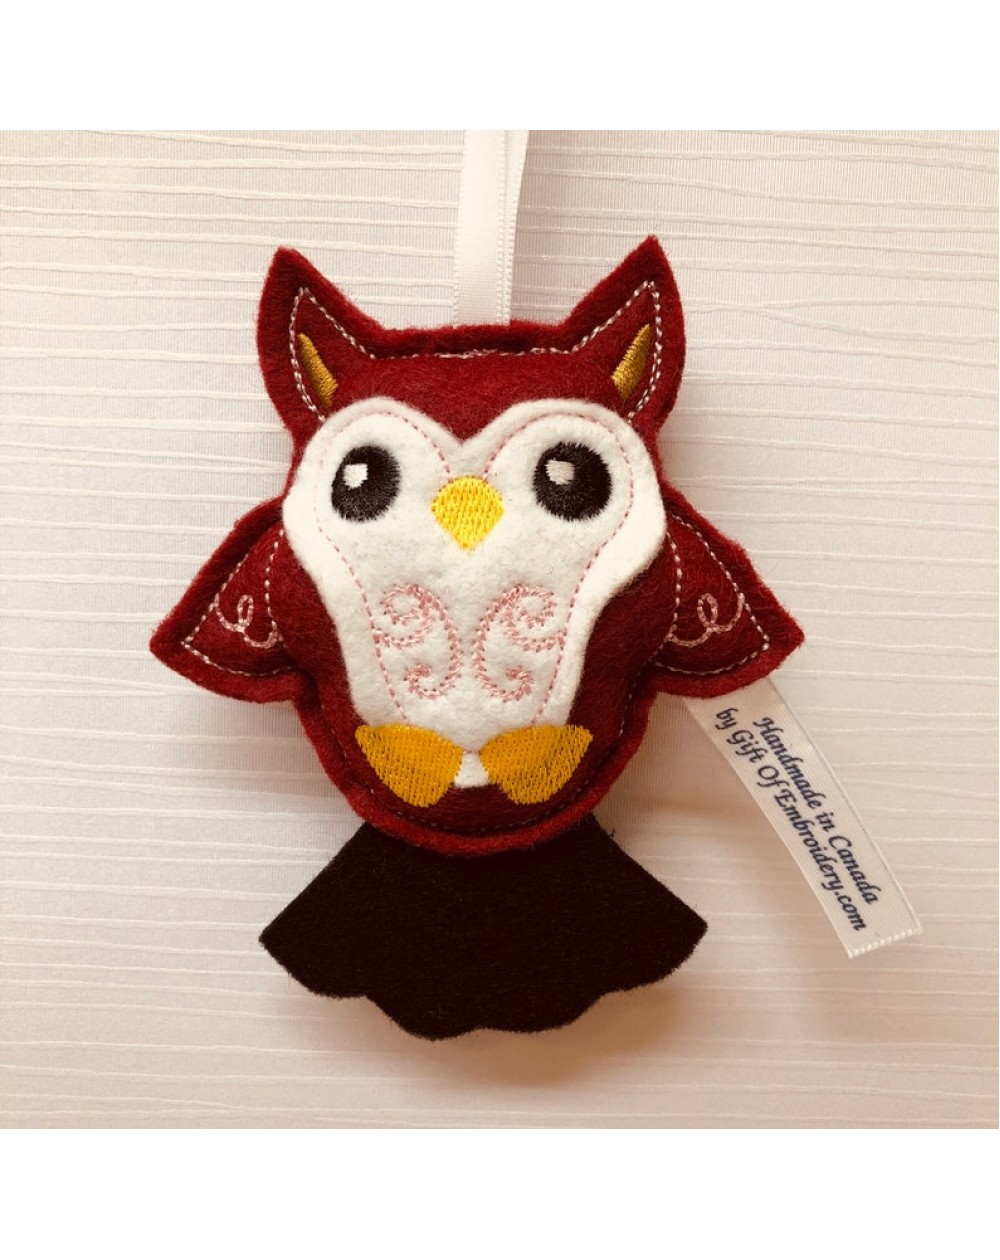 Owl holiday ornament